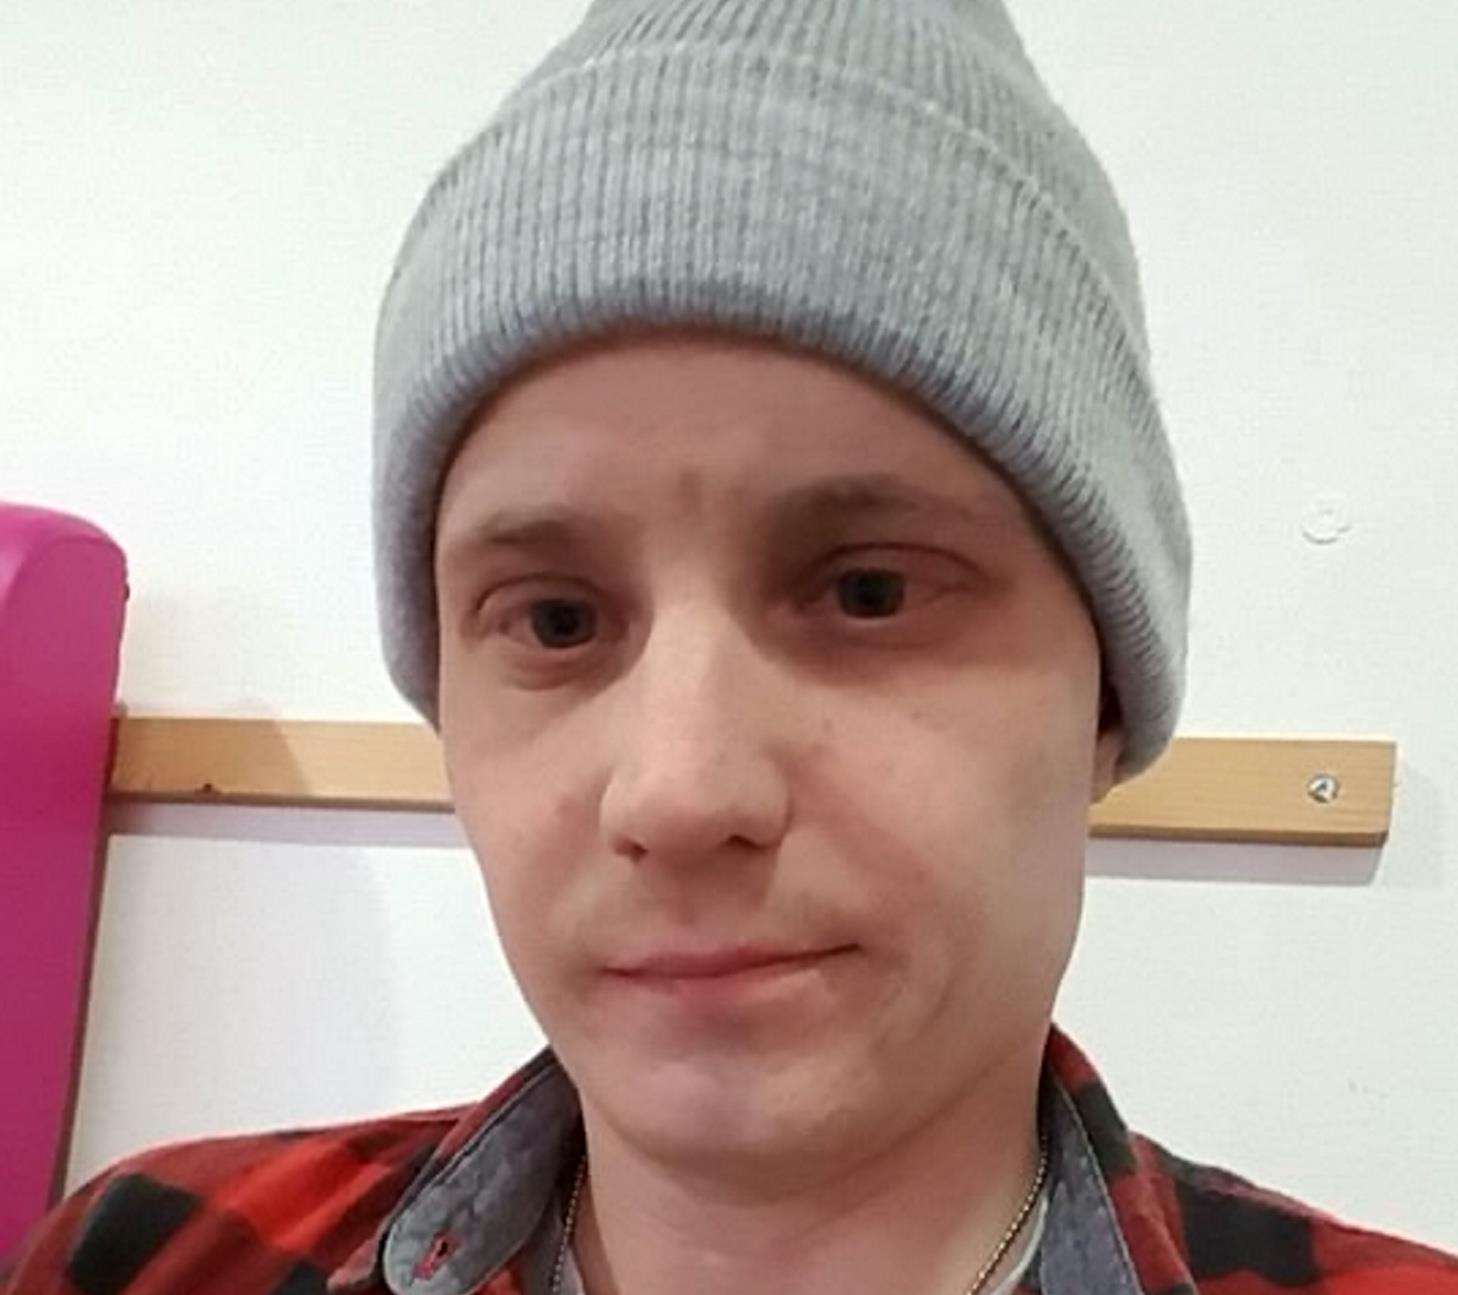 Simon Thompson underwent chemotherapy as he battled stage 4 Non Hodgkin's Lymphoma. Picture: SWNS